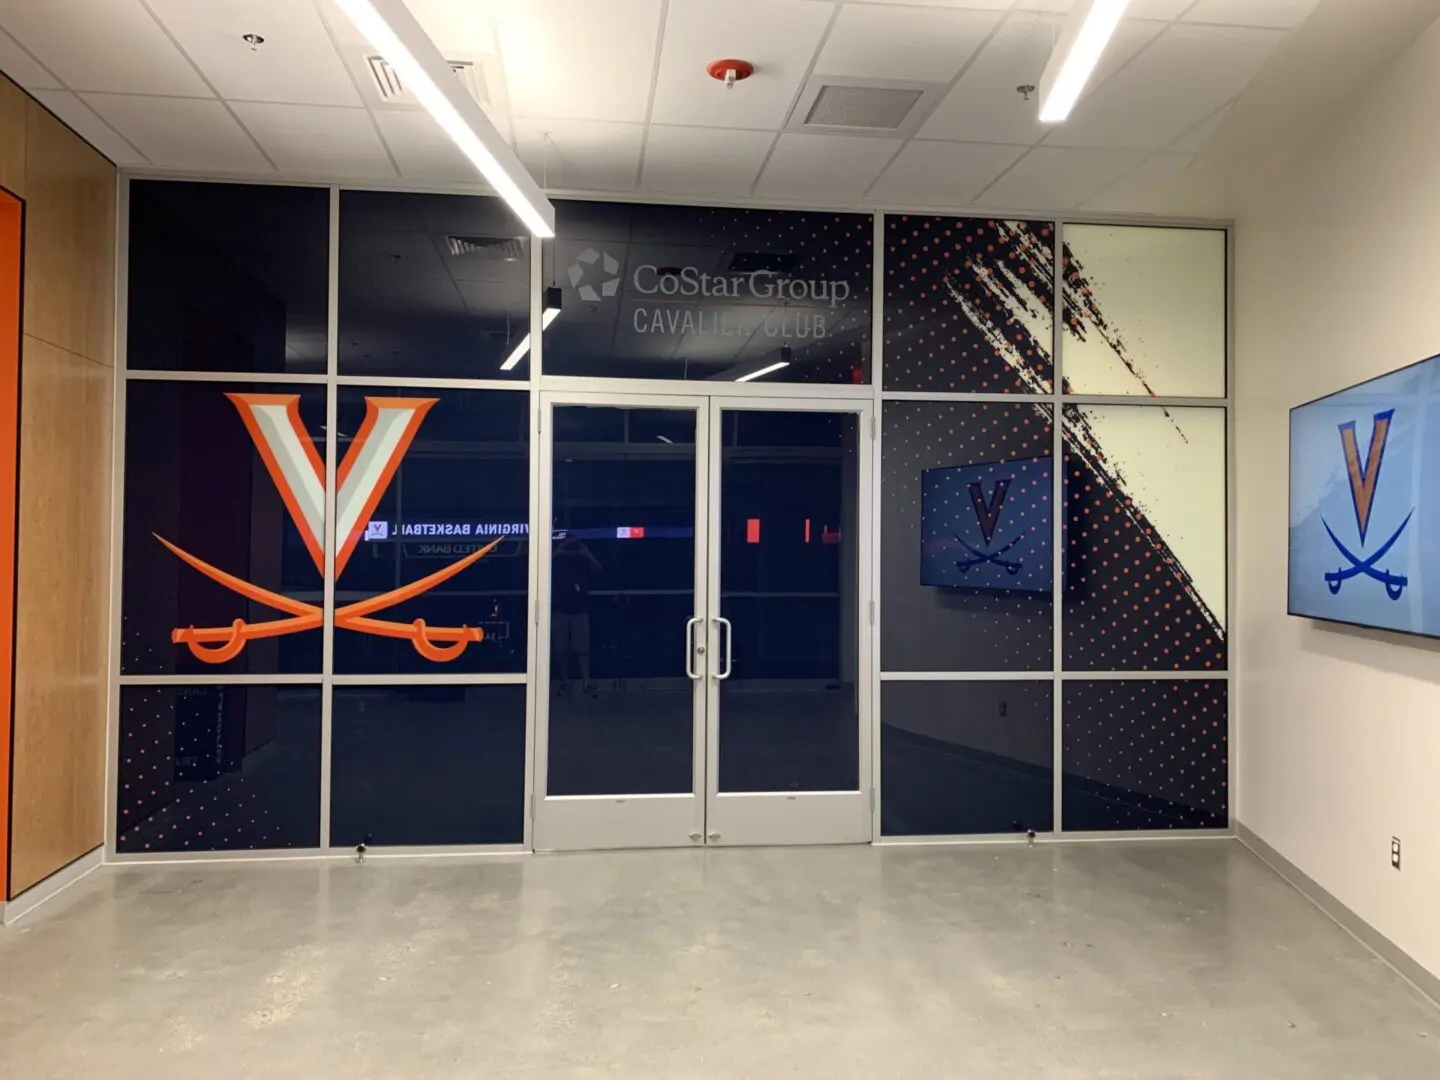 A large window with the virginia cavaliers logo on it.